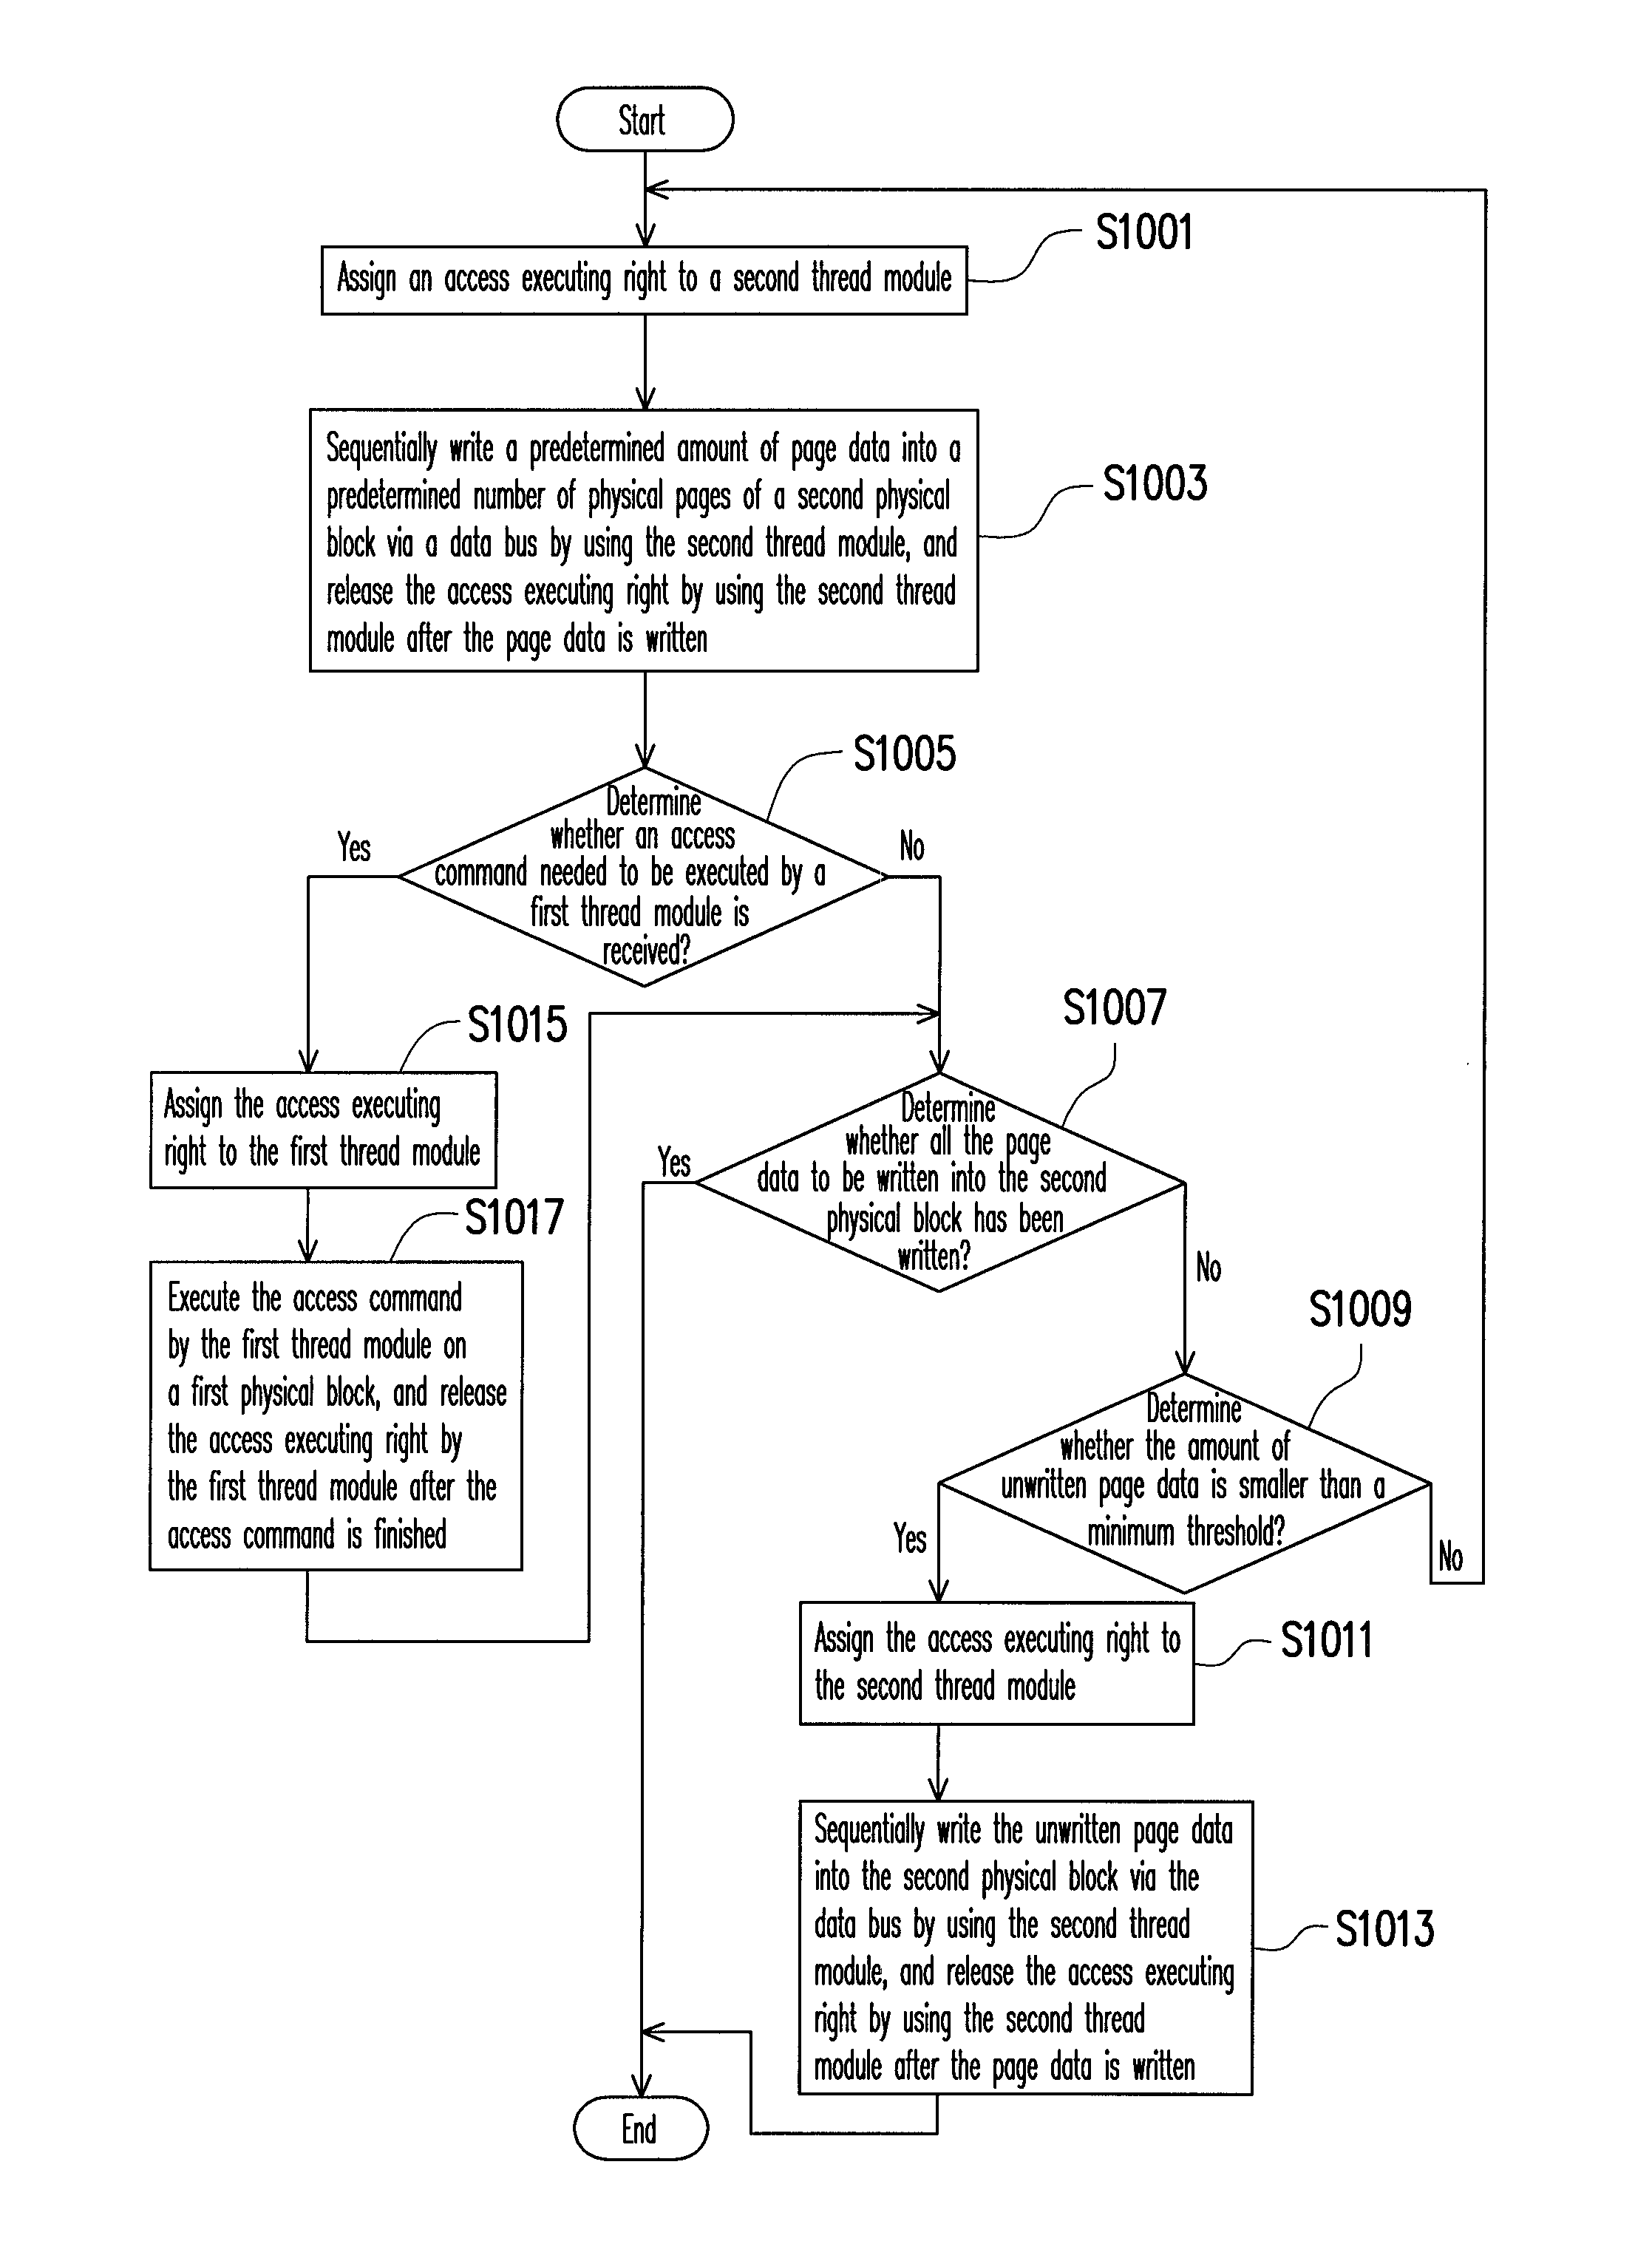 Multi-threaded memory operation using block write interruption after a number or threshold of pages have been written in order to service another request